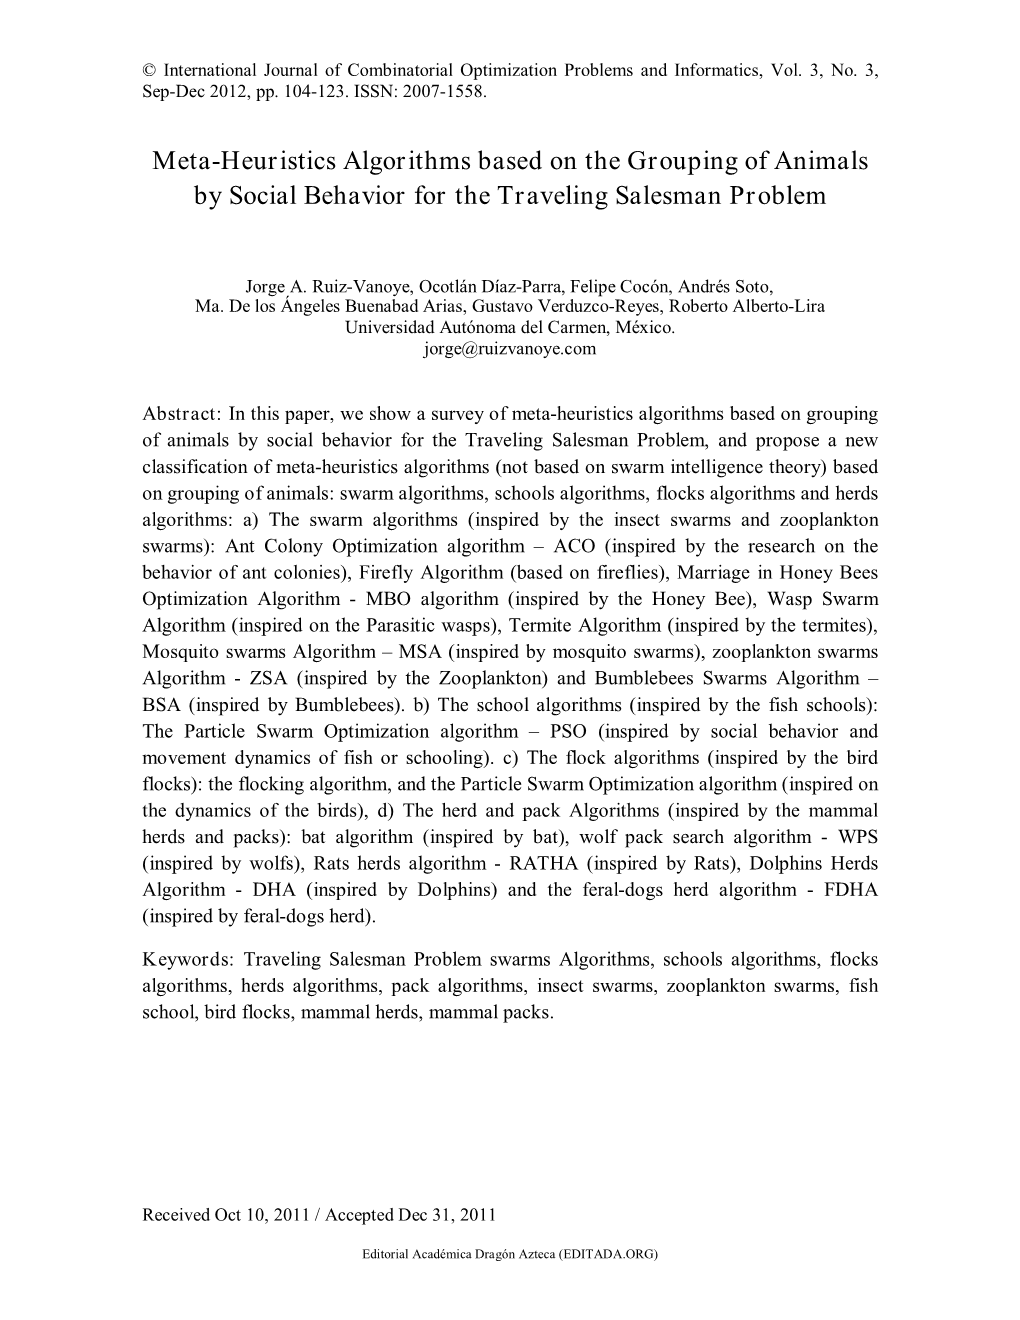 Meta-Heuristics Algorithms Based on the Grouping of Animals by Social Behavior for the Traveling Salesman Problem